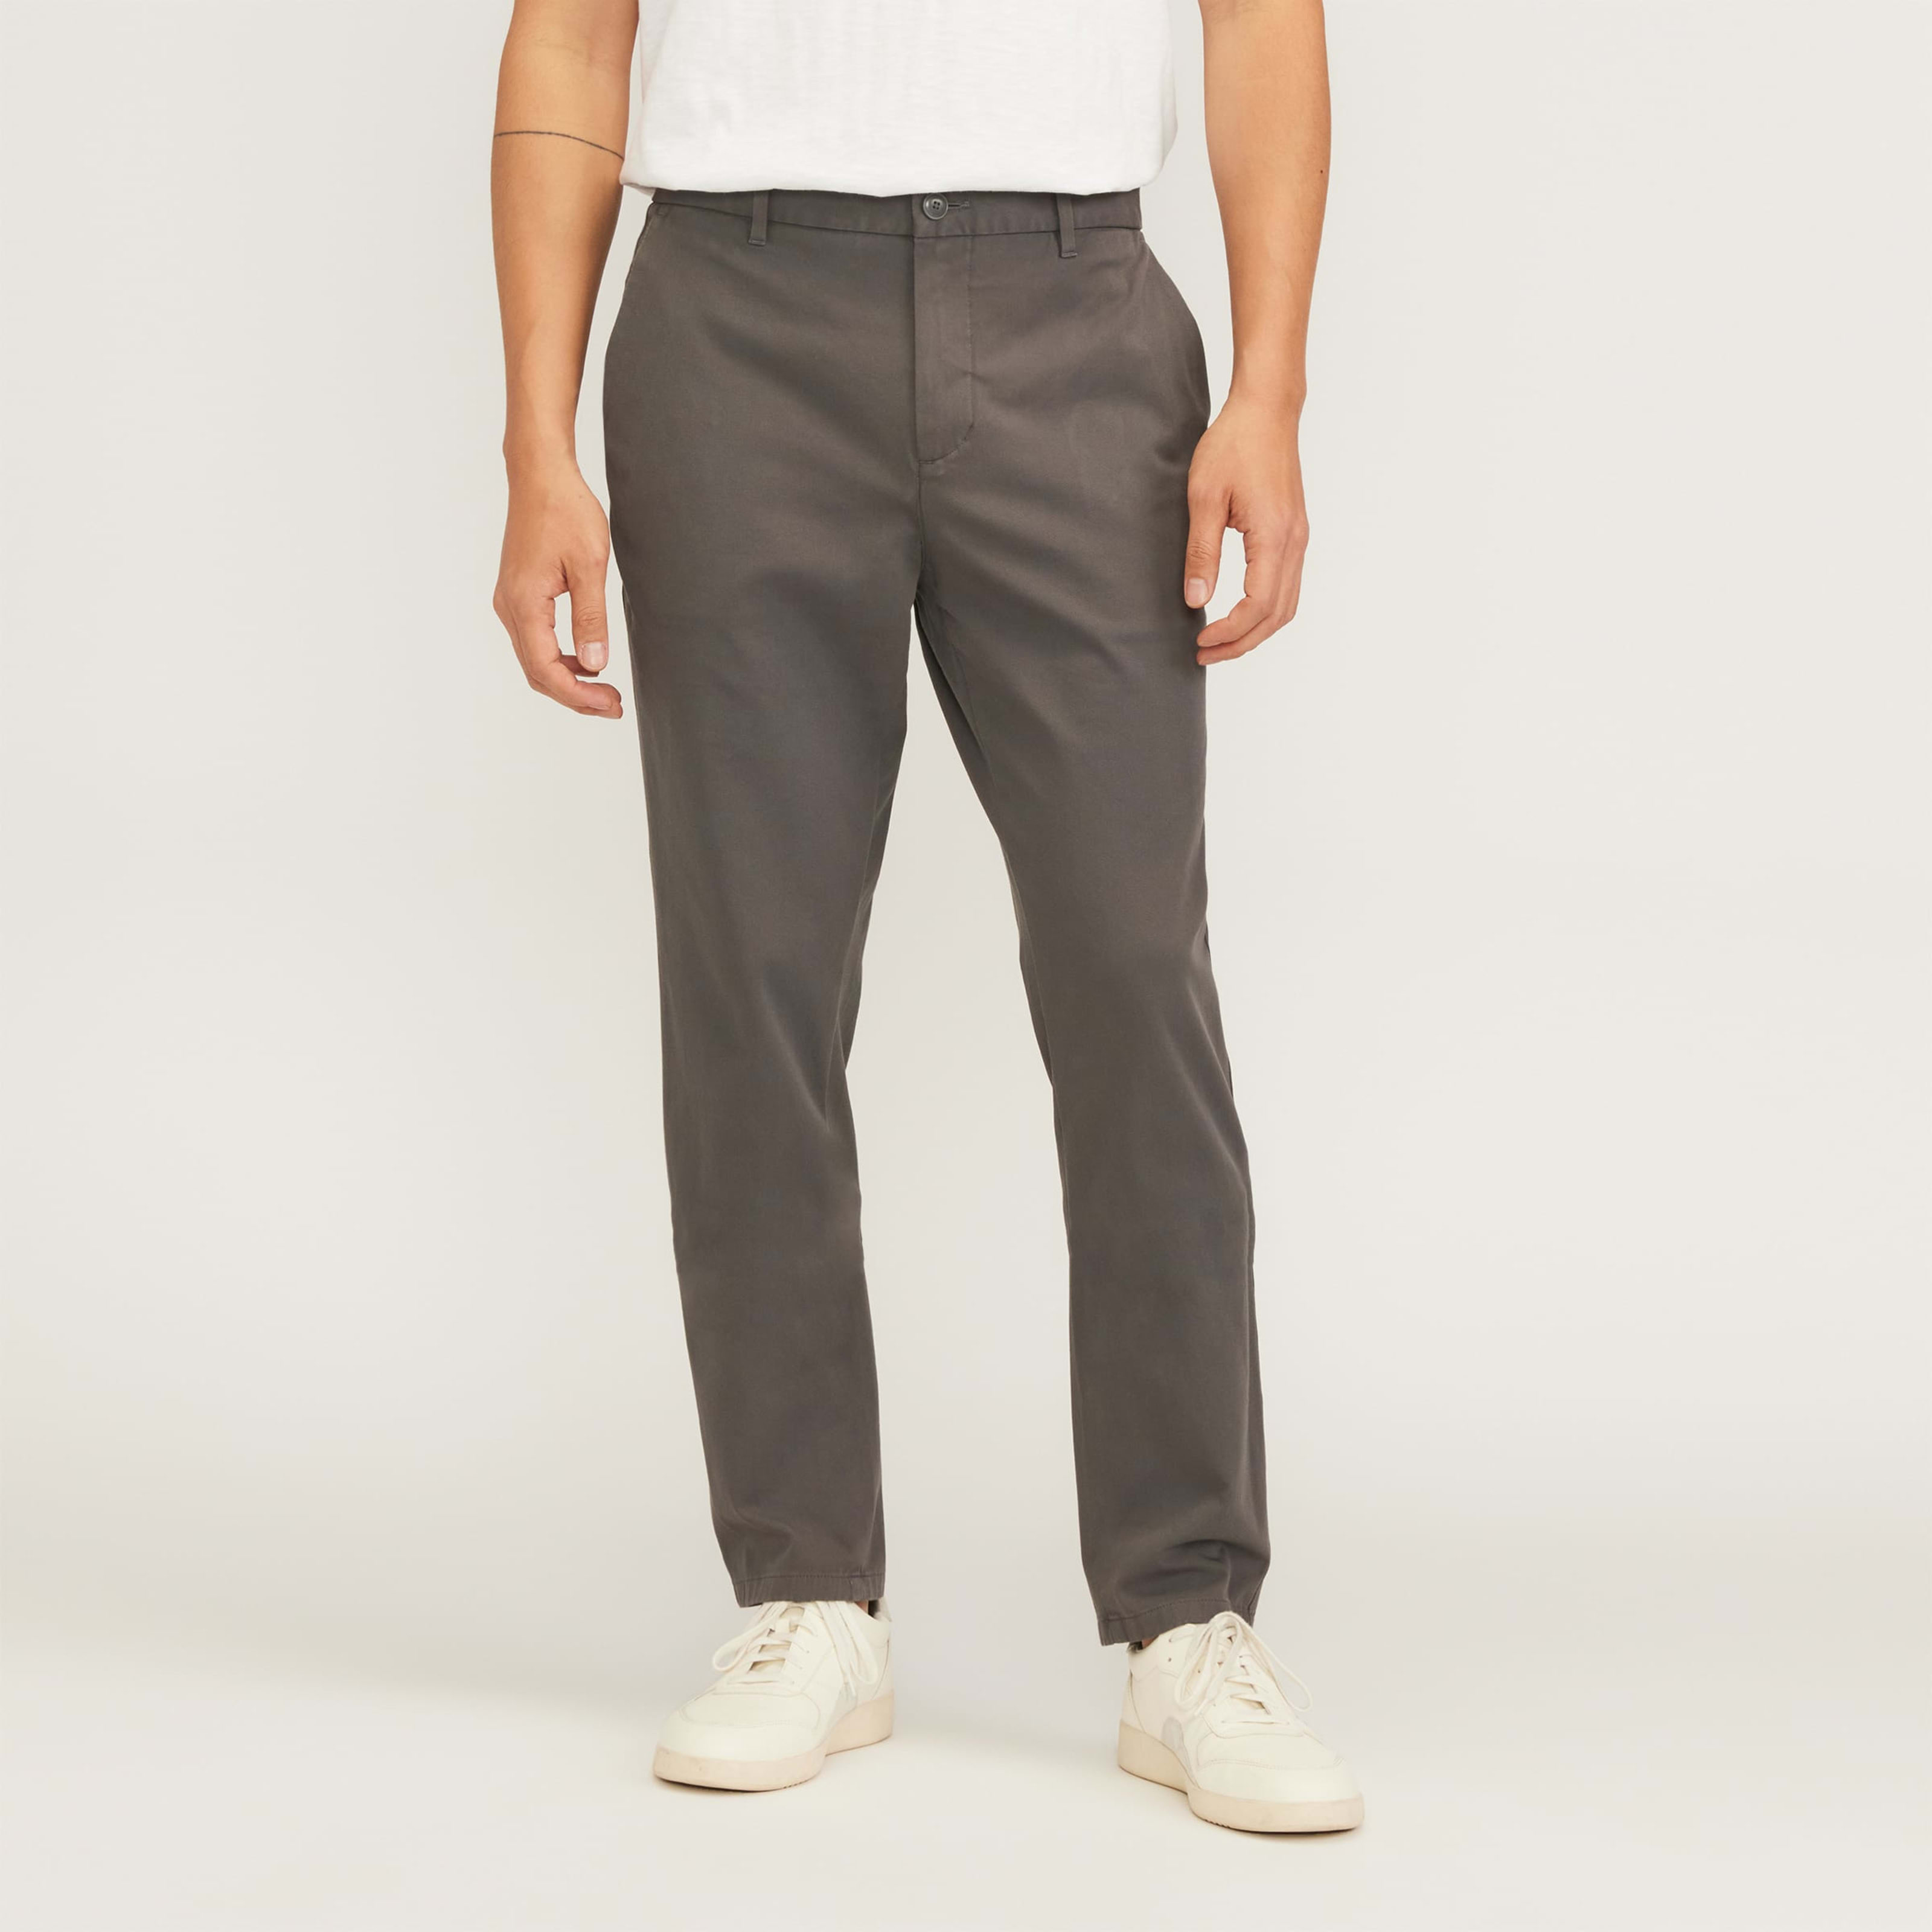 men's performance chino | uniform by everlane in slate grey, size 31x28